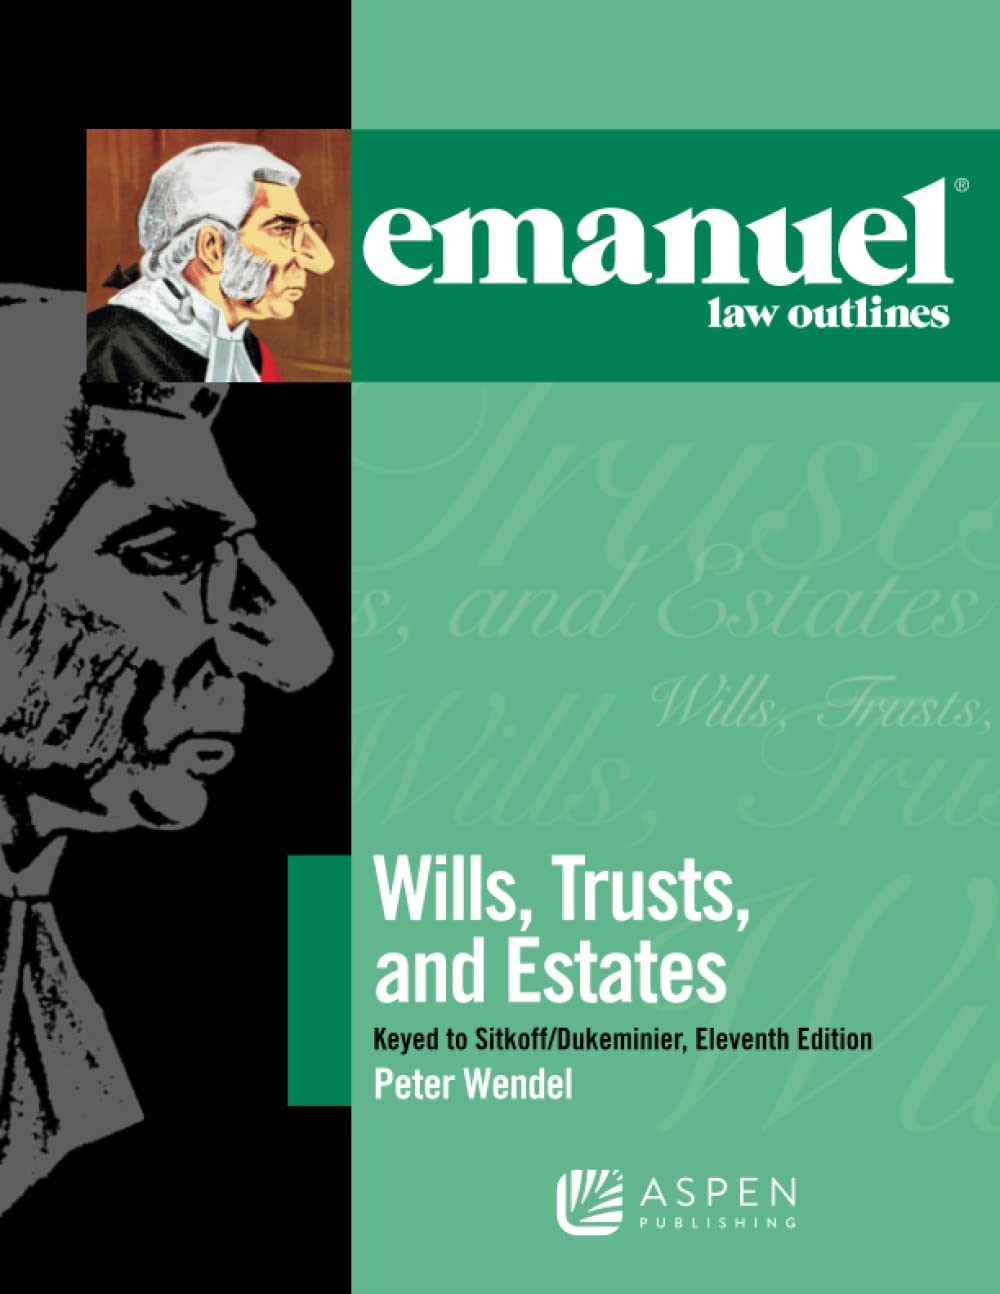 Emanuel Law Outlines for Wills, Trusts, and Estates Keyed to Sitkoff and Dukeminier (Emanuel Law Outlines Series)